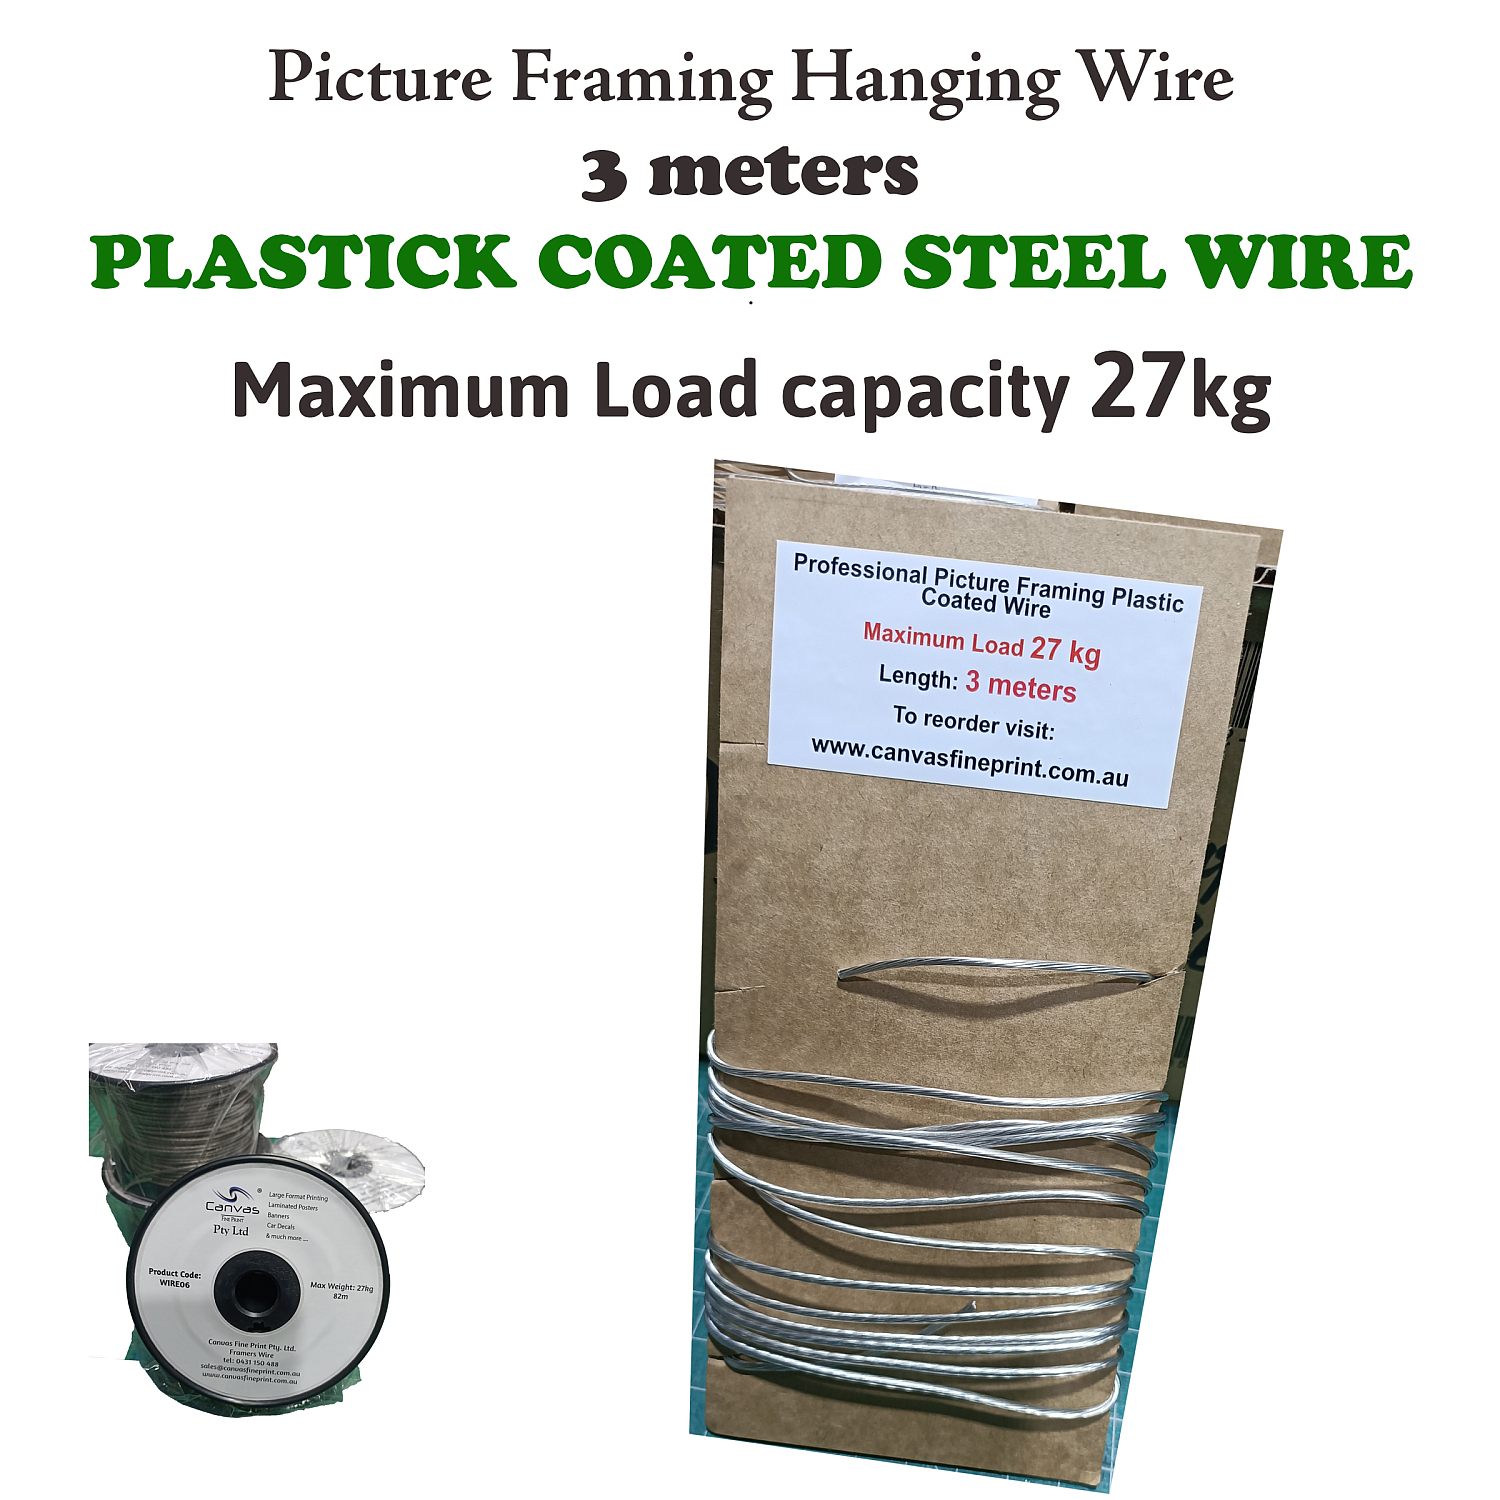 Picture Framing Hanging Plastic Coated Steel Wire 3m, Weight Load 27kg | 27kg_wire_3_meters.jpg